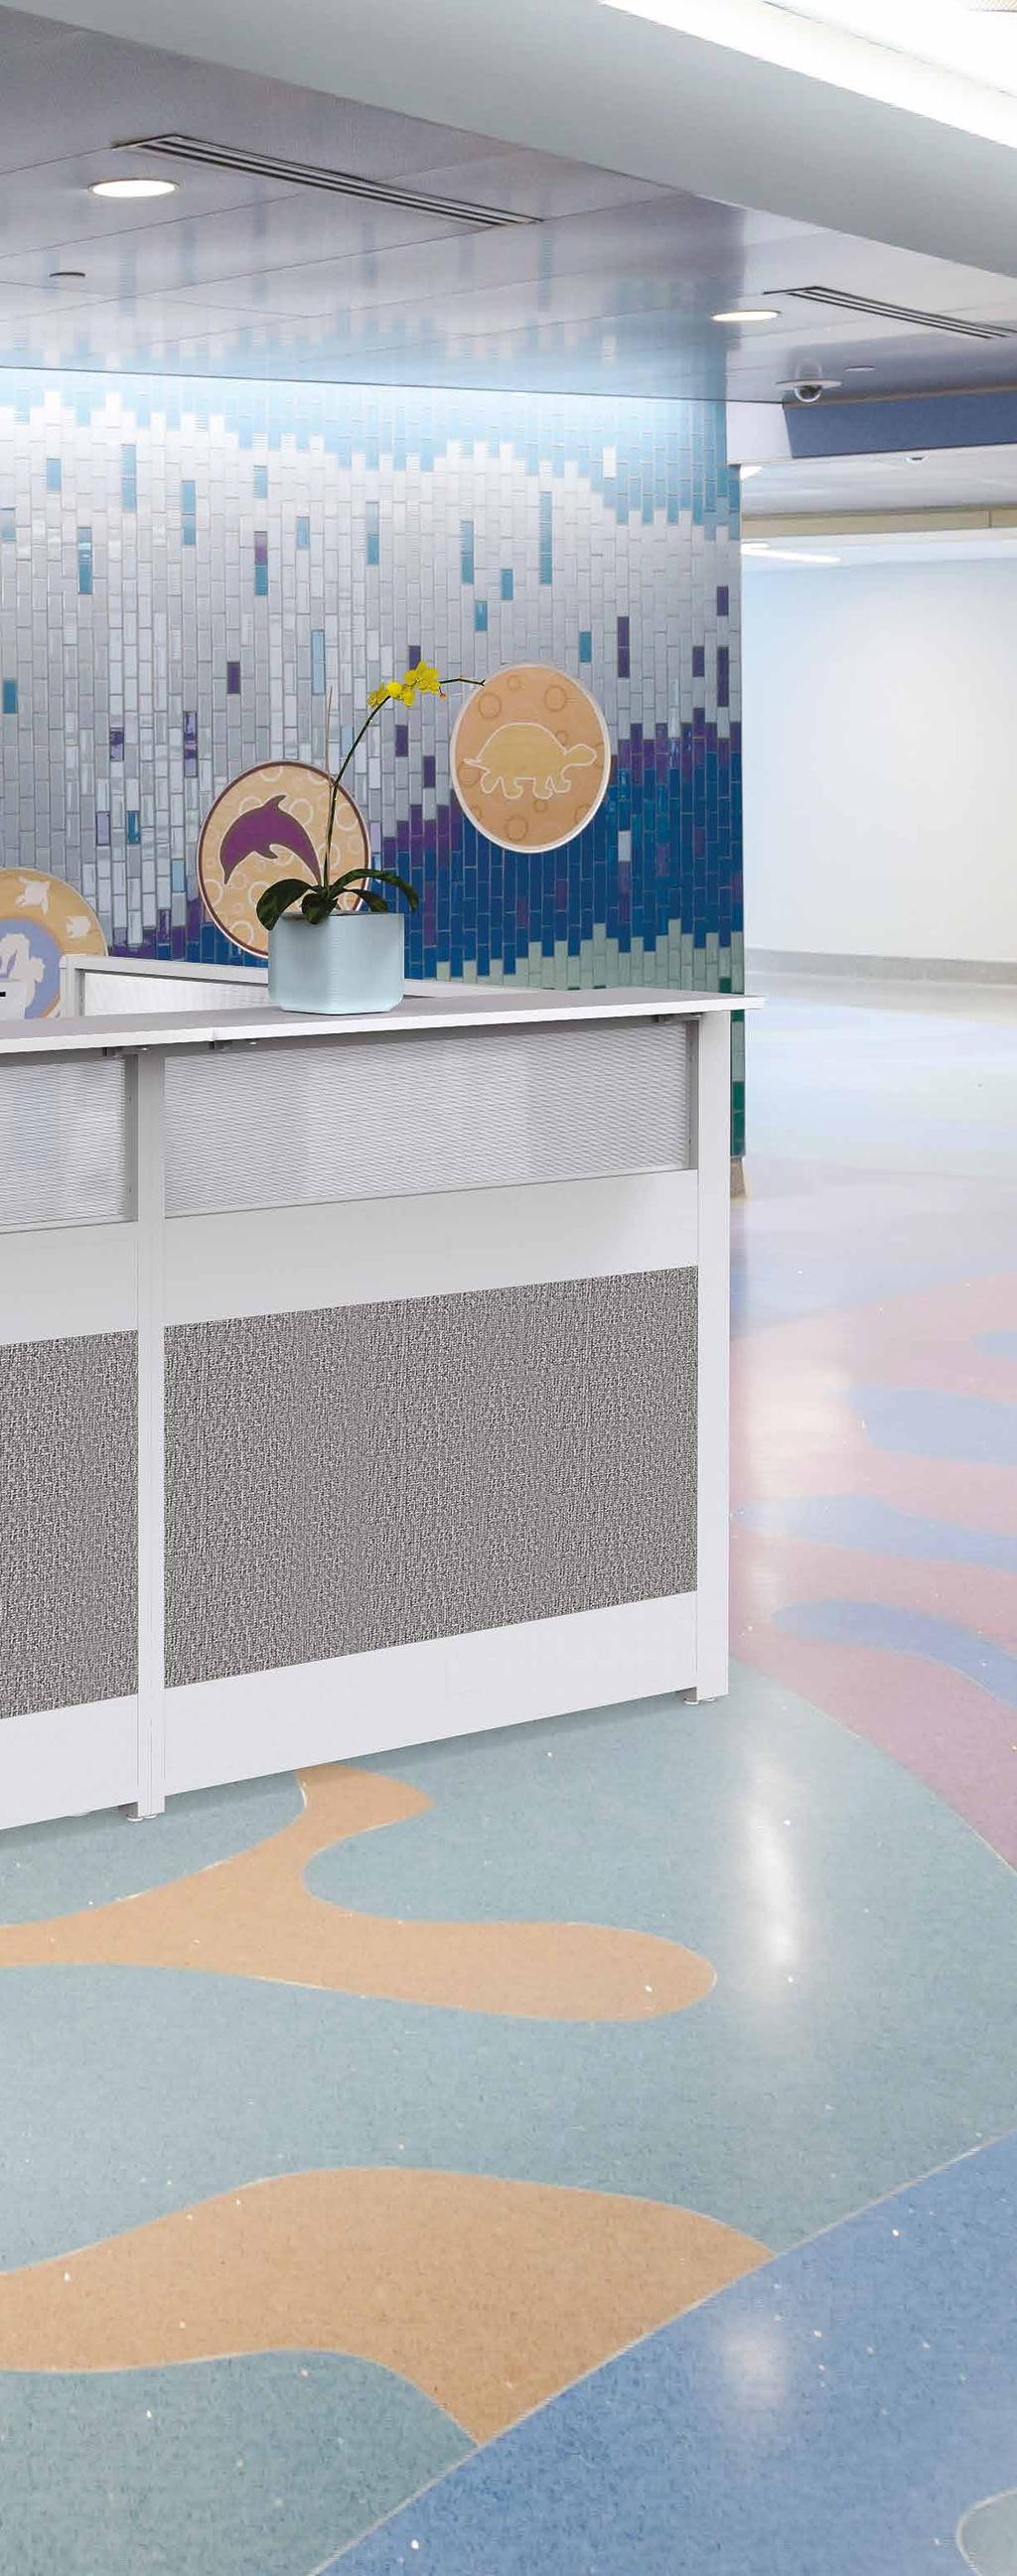 HEALTHCARE Refine any wellness space with carefully crafted furniture solutions designed with